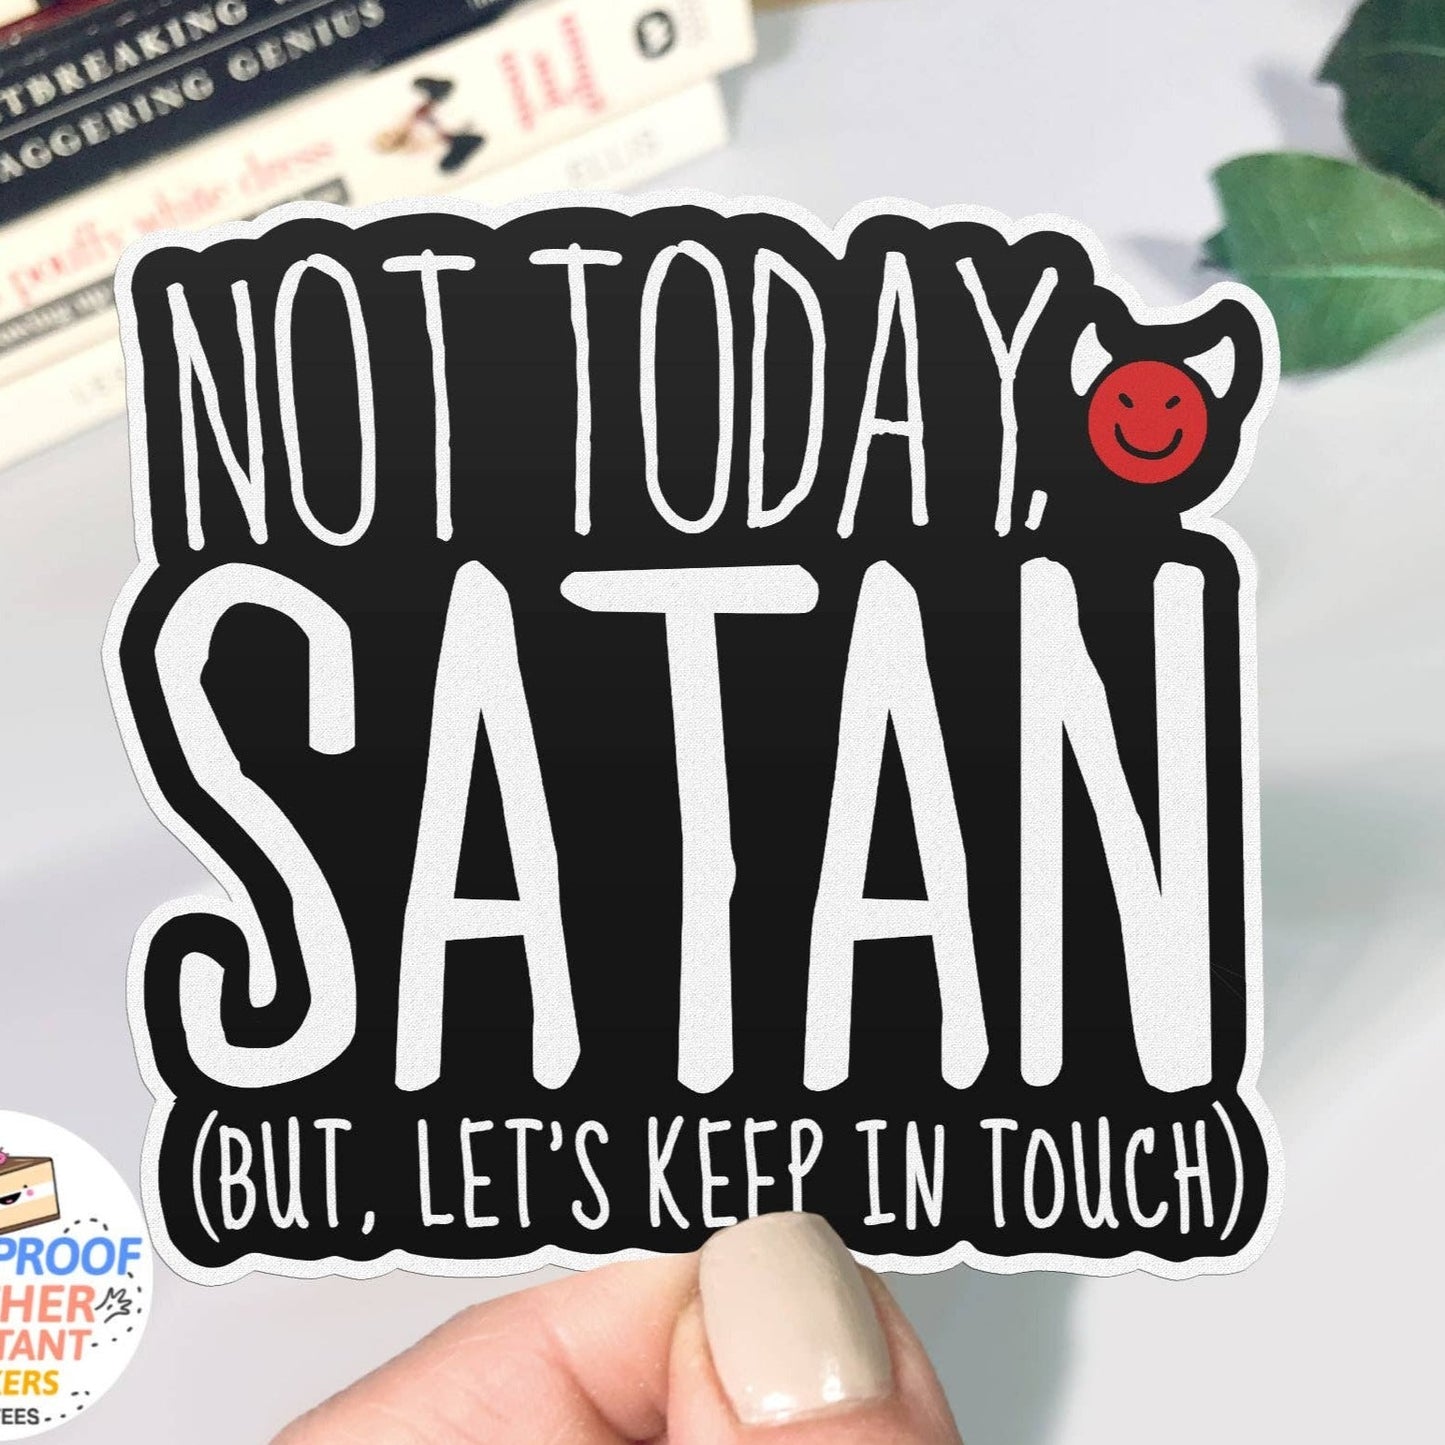 Boots Tees - Not Today Satan Funny Quote Sticker, 3" Decal with Saying